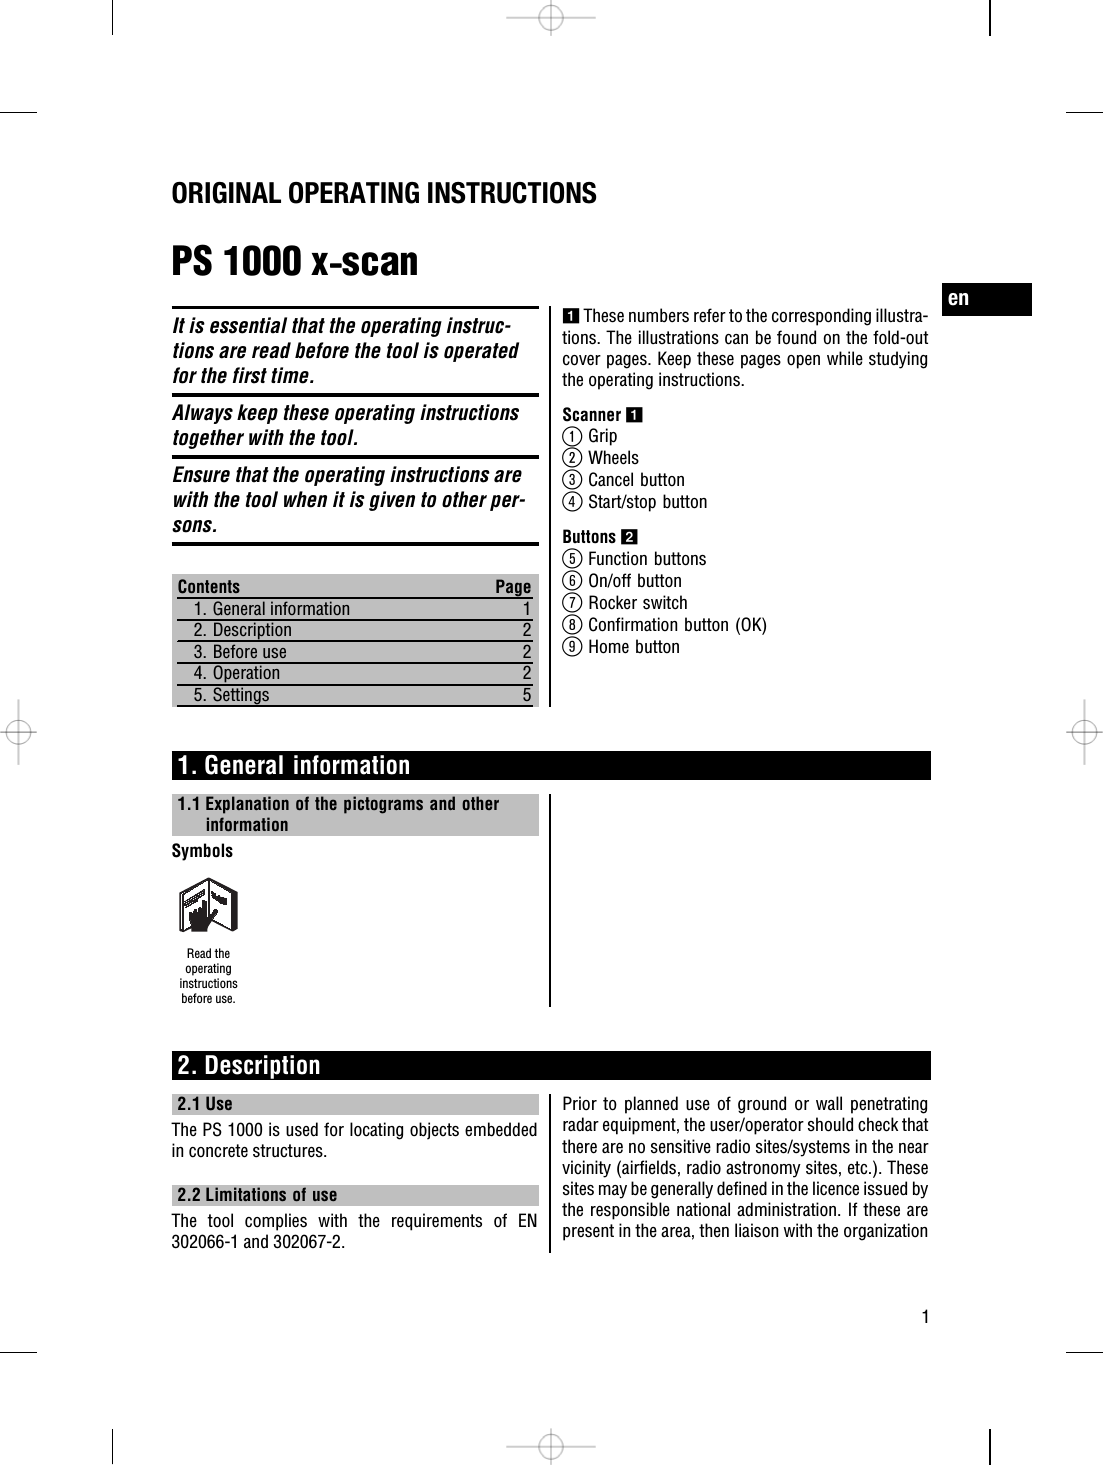 ORIGINAL OPERATING INSTRUCTIONSPS 1000 x‑scanIt is essential that the operating instruc-tions are read before the tool is operatedfor the first time.Always keep these operating instructionstogether with the tool.Ensure that the operating instructions arewith the tool when it is given to other per-sons.Contents Page1. General information 12. Description 23. Before use 24. Operation 25. Settings 51These numbers refer to the corresponding illustra-tions. The illustrations can be found on the fold-outcover pages. Keep these pages open while studyingthe operating instructions.Scanner 1@Grip;Wheels=Cancel button%Start/stop buttonButtons 2&amp;Function buttons(On/off button)Rocker switch+Confirmation button (OK)§Home button1. General information1.1 Explanation of the pictograms and otherinformationSymbolsRead theoperatinginstructionsbefore use.2. Description2.1 UseThe PS 1000 is used for locating objects embeddedin concrete structures.2.2 Limitations of useThe tool complies with the requirements of EN302066-1 and 302067-2.Prior to planned use of ground or wall penetratingradar equipment, the user/operator should check thatthere are no sensitive radio sites/systems in the nearvicinity (airfields, radio astronomy sites, etc.). Thesesites may be generally defined in the licence issued bythe responsible national administration. If these arepresent in the area, then liaison with the organizationen1